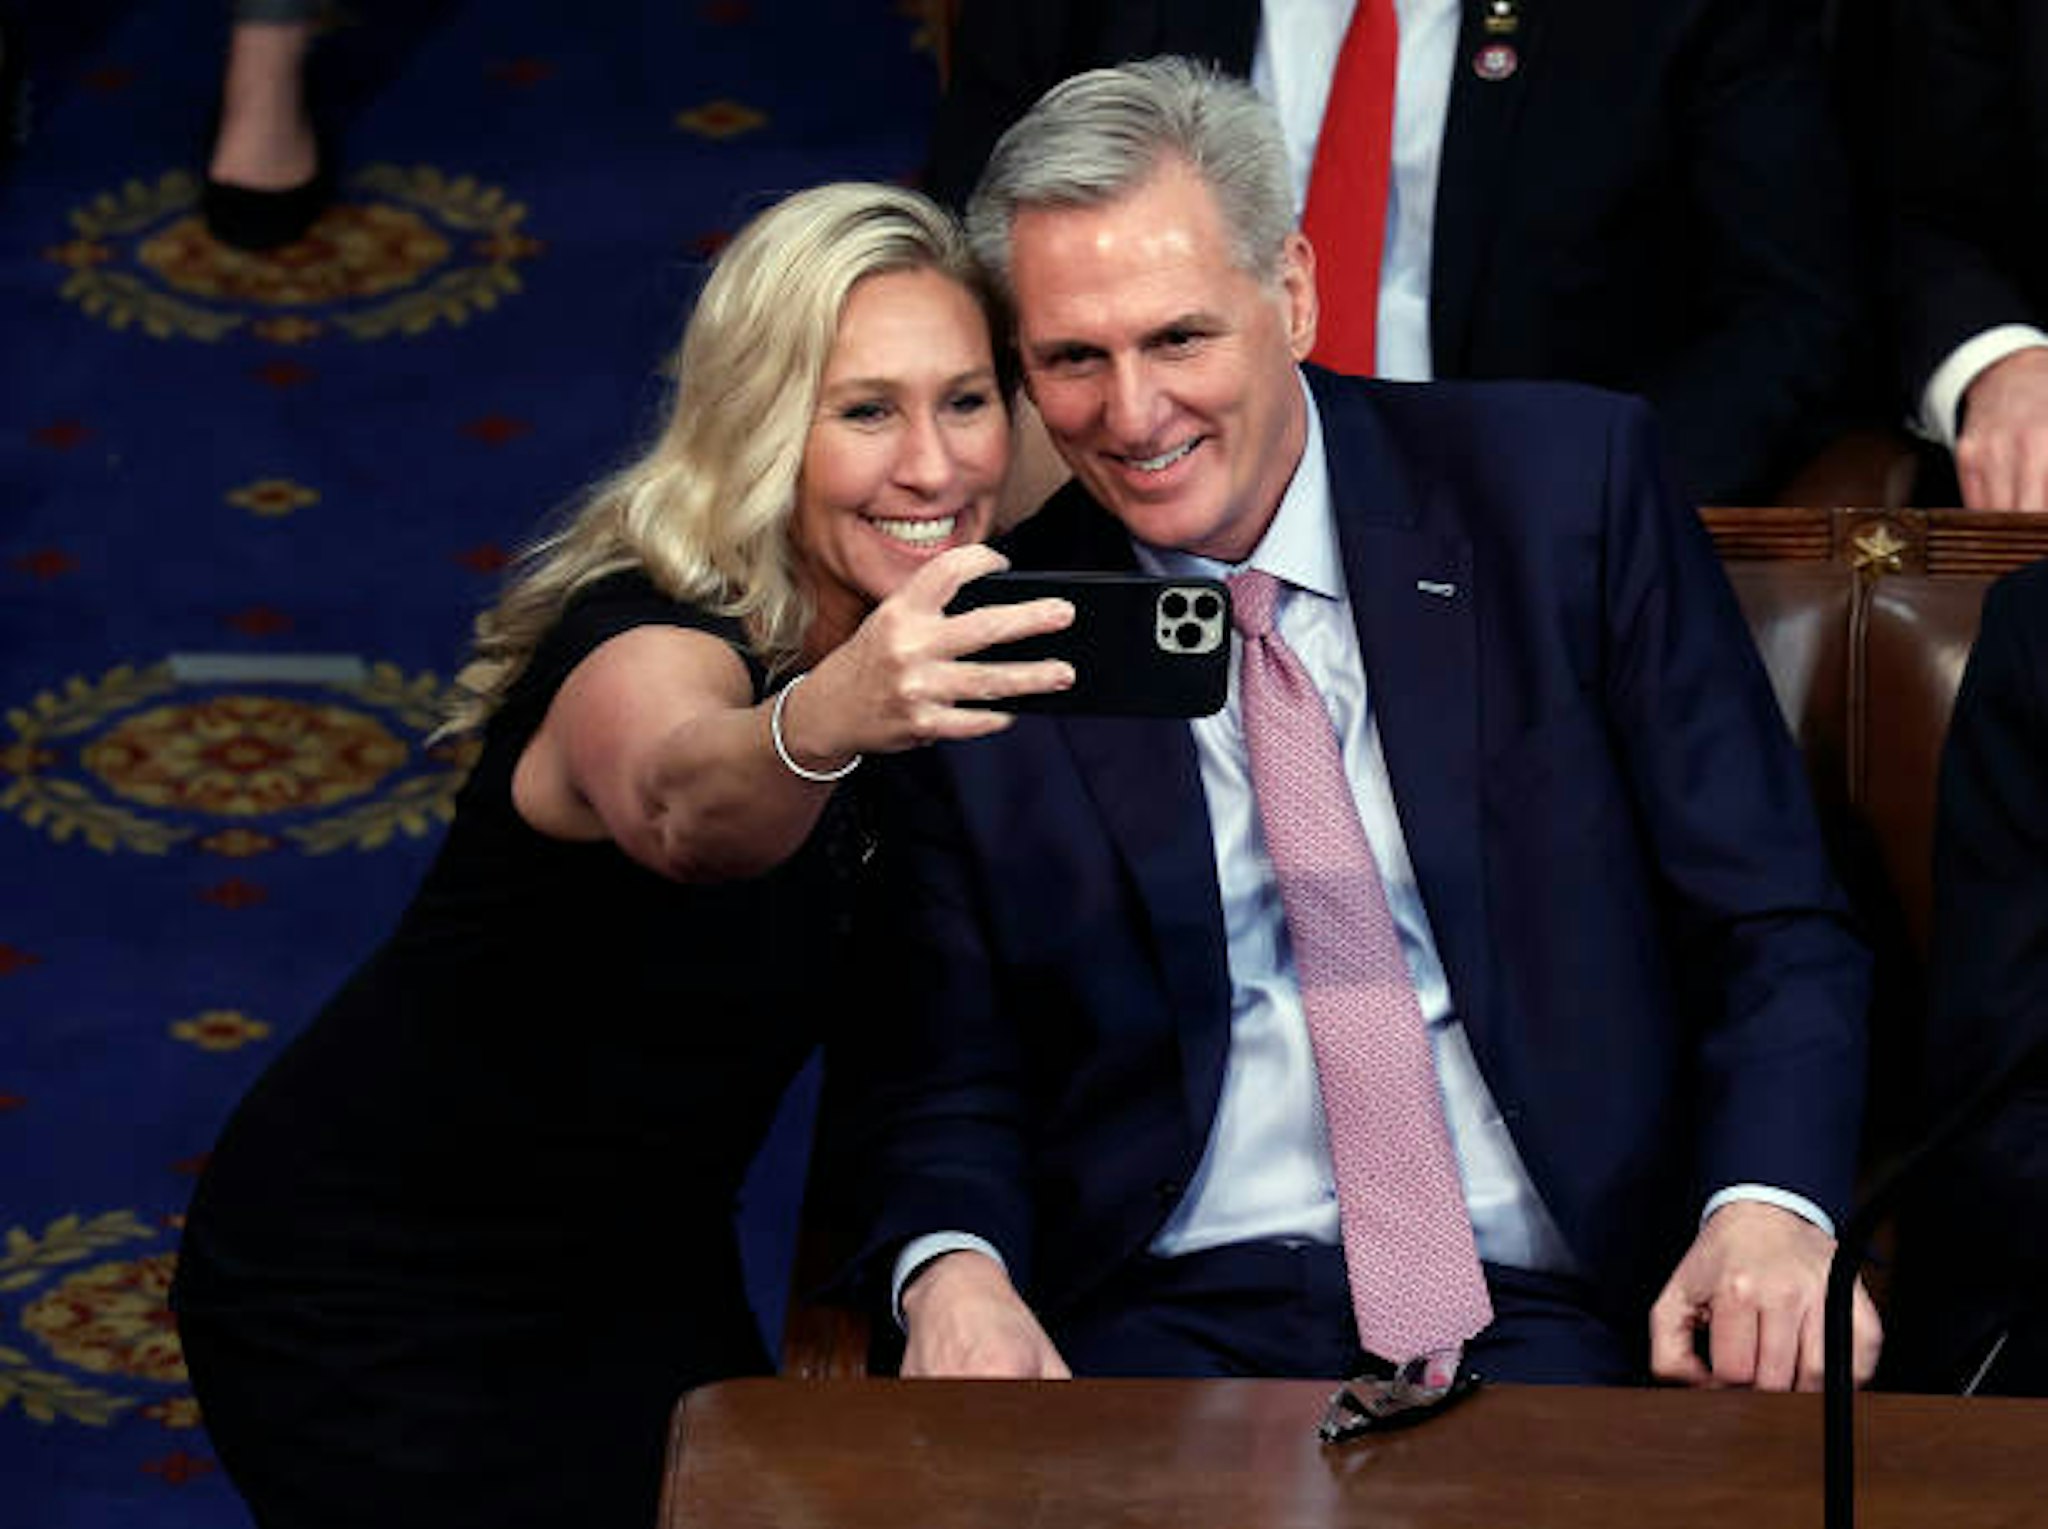 WASHINGTON, DC - JANUARY 06: Rep.-elect Marjorie Taylor Greene (R-GA) takes a photo with U.S. House Republican Leader Kevin McCarthy (R-CA) after being elected Speaker of the House in the House Chamber at the U.S. Capitol Building on January 07, 2023 in Washington, DC. After four days of voting and 15 ballots McCarthy secured enough votes to become Speaker of the House for the 118th Congress. (Photo by Anna Moneymaker/Getty Images)